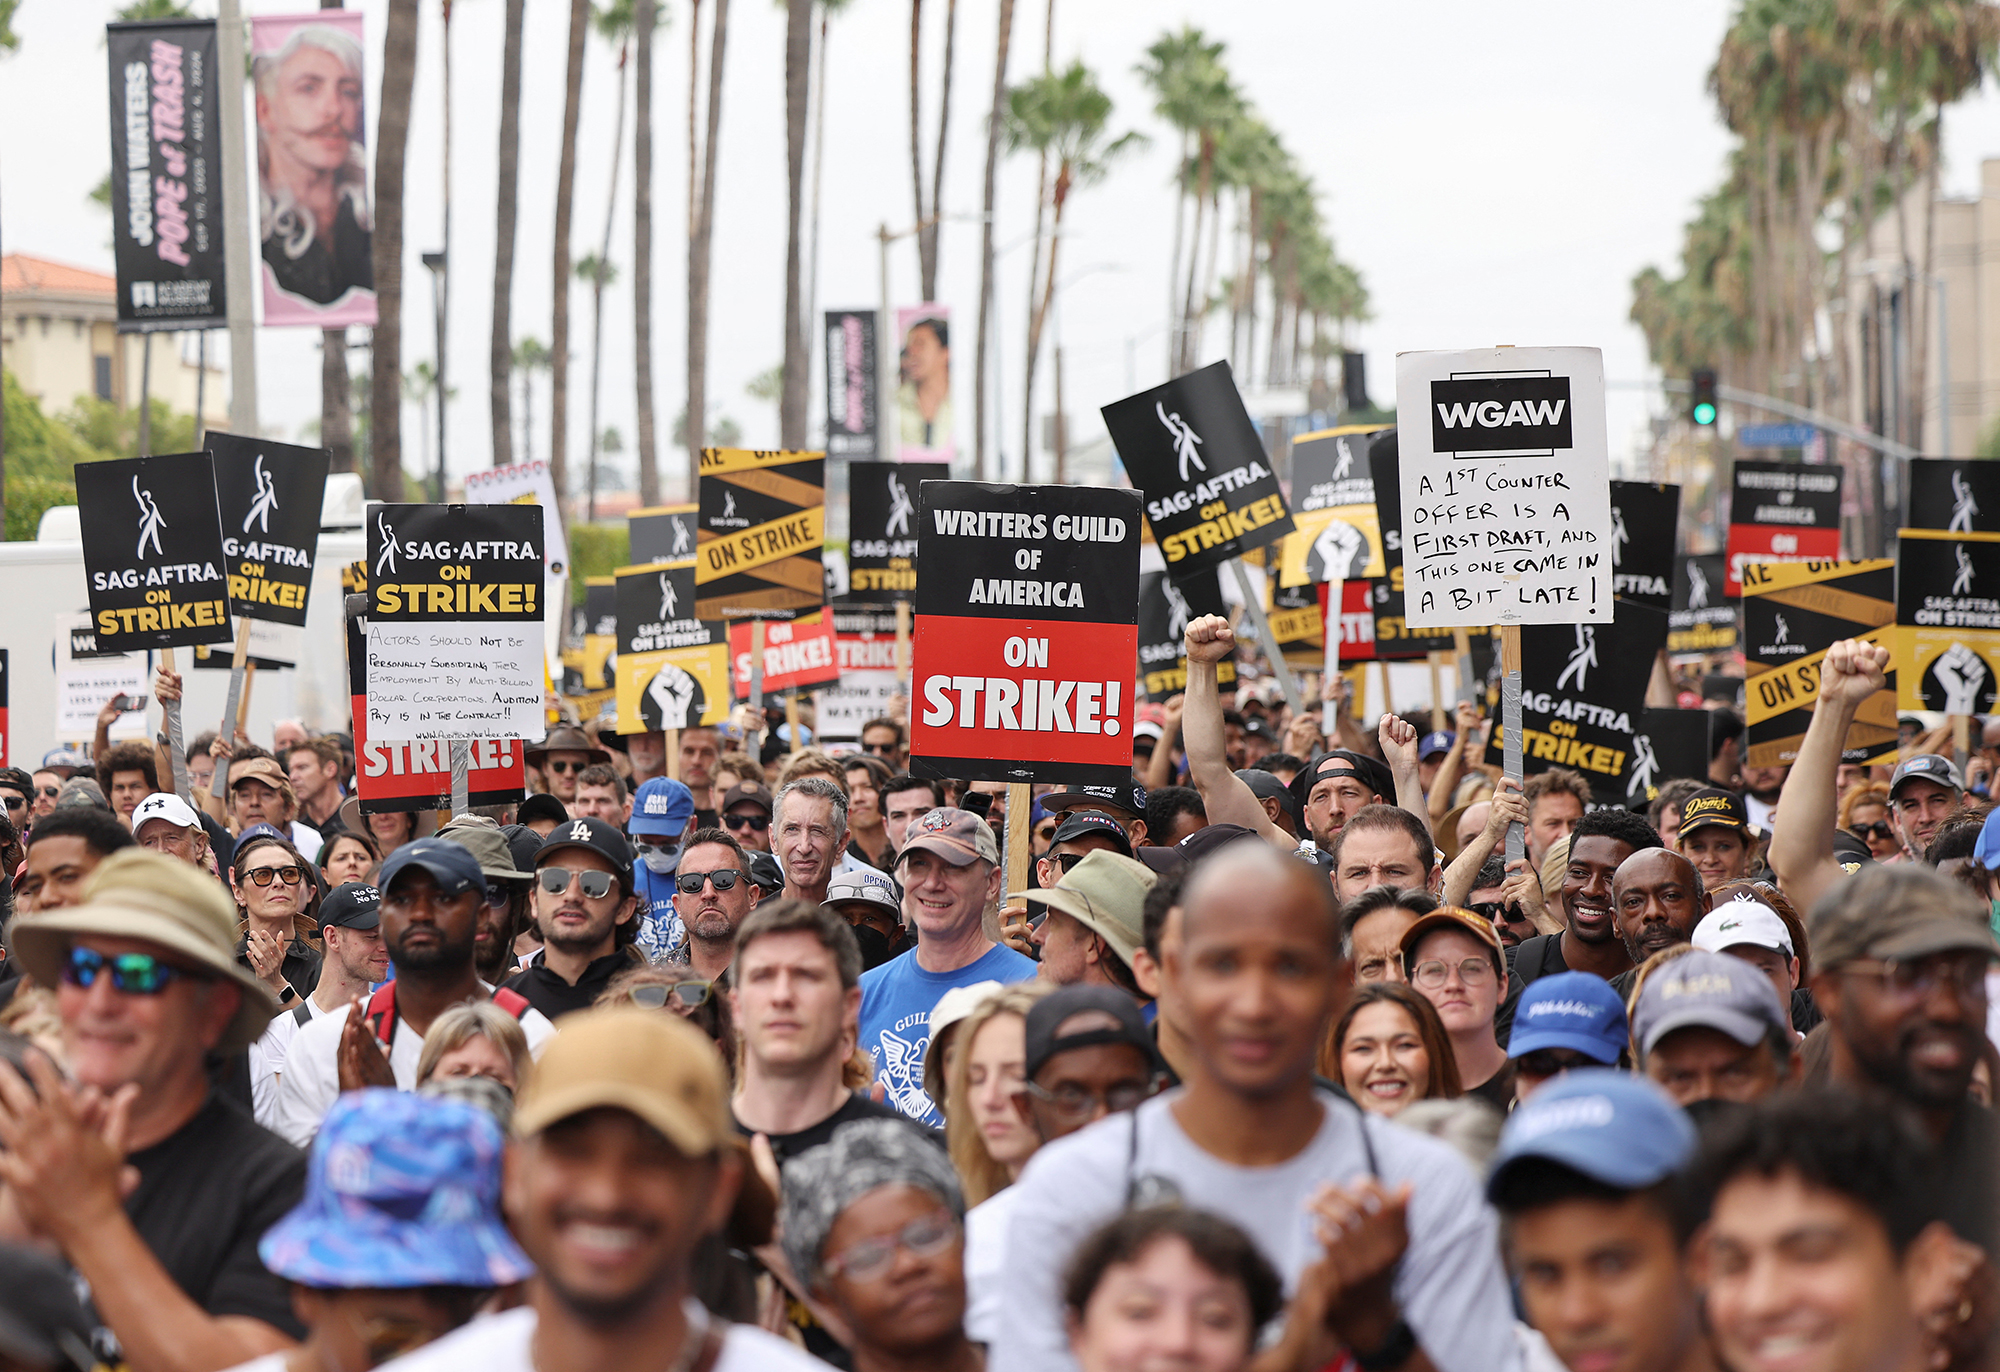 Members of SAG-AFTRA and the Writers Guild of America picket in Los Angeles, California, on September 13. 